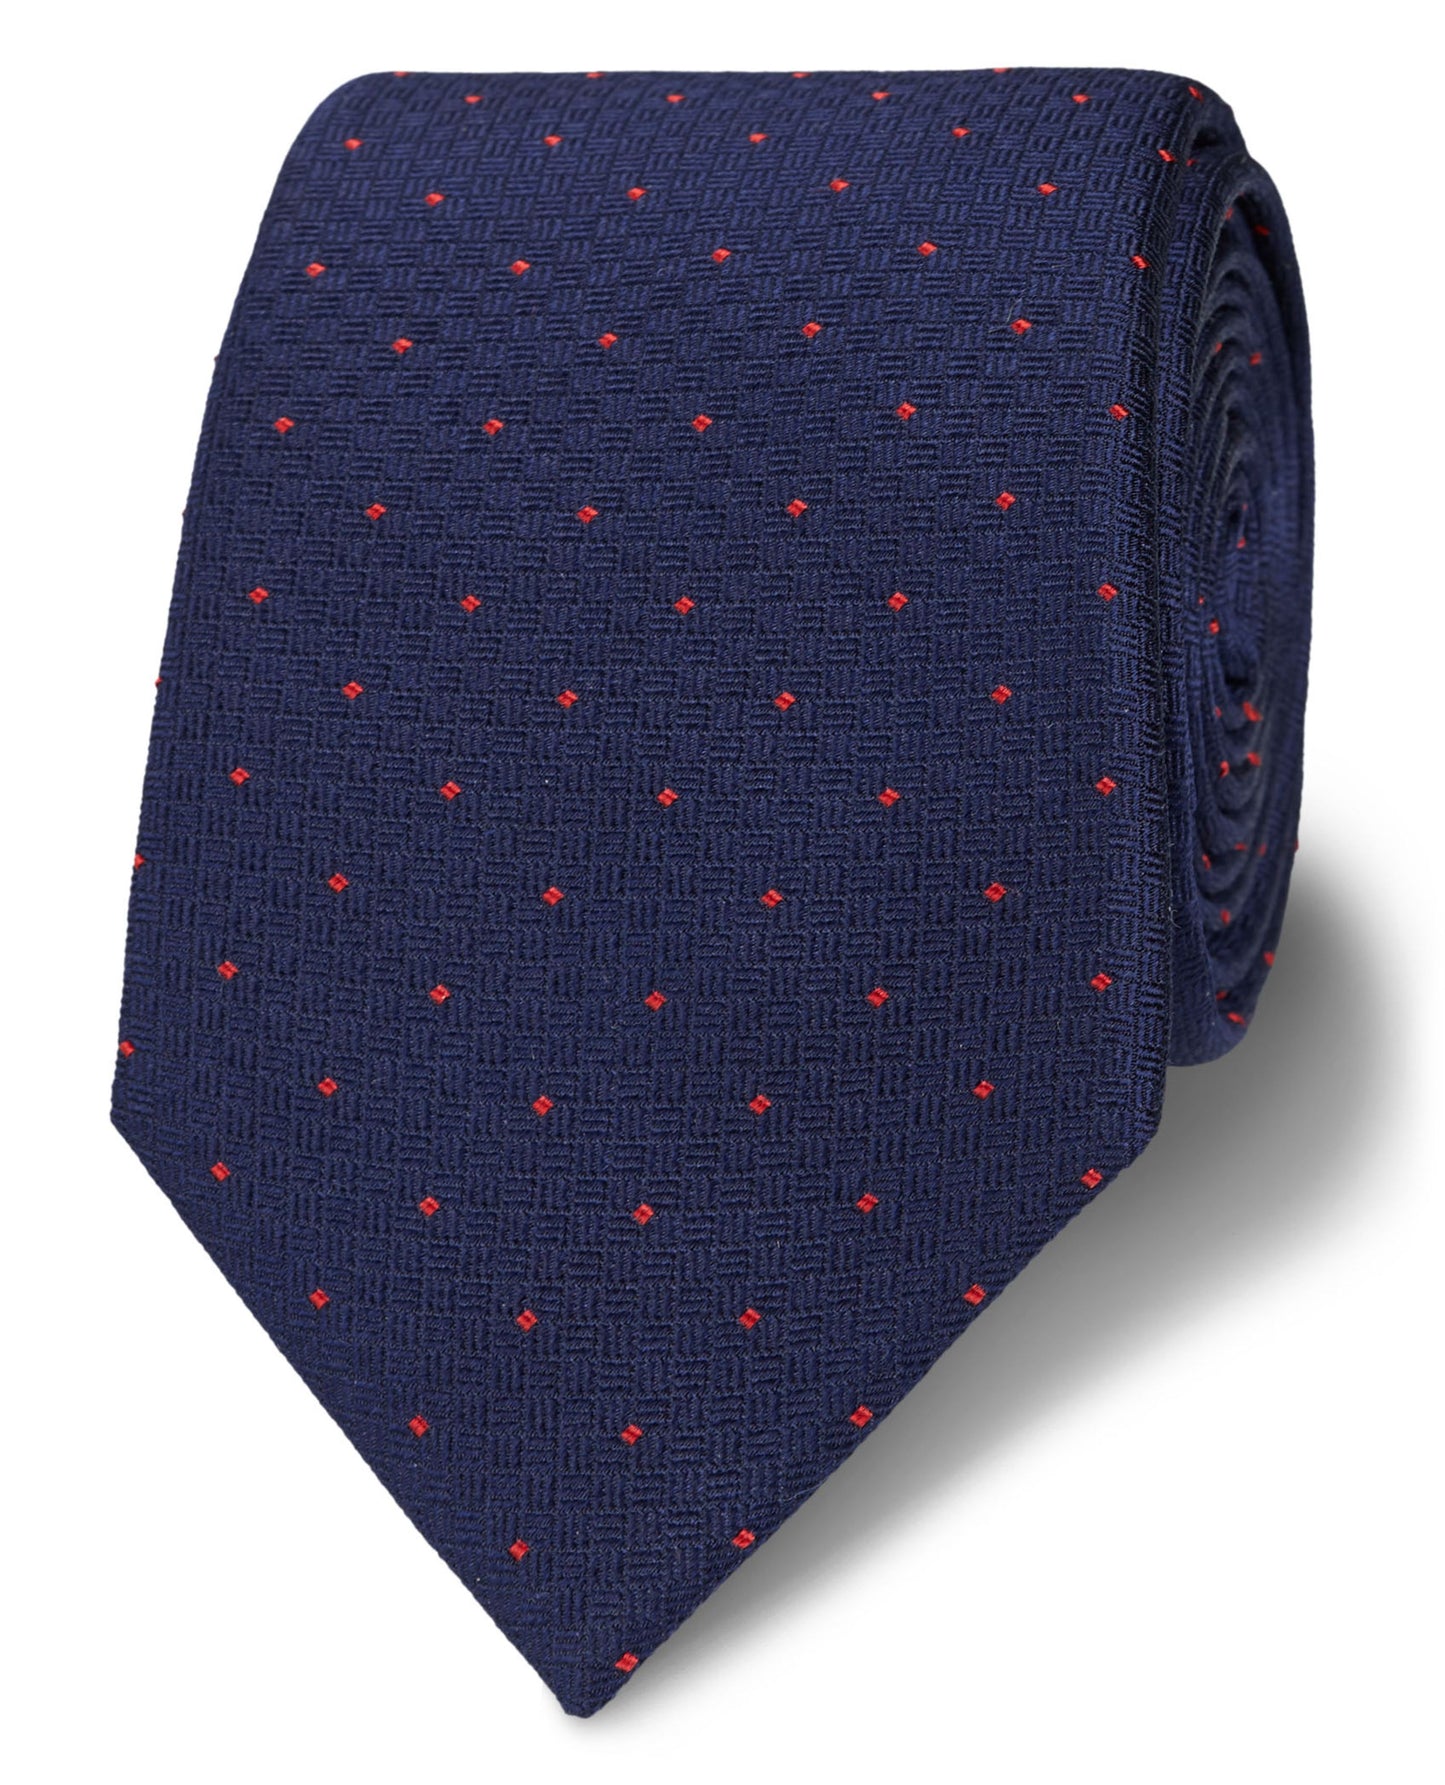 Image 1 of Slim Navy and Red Textured Pin Spot Tie